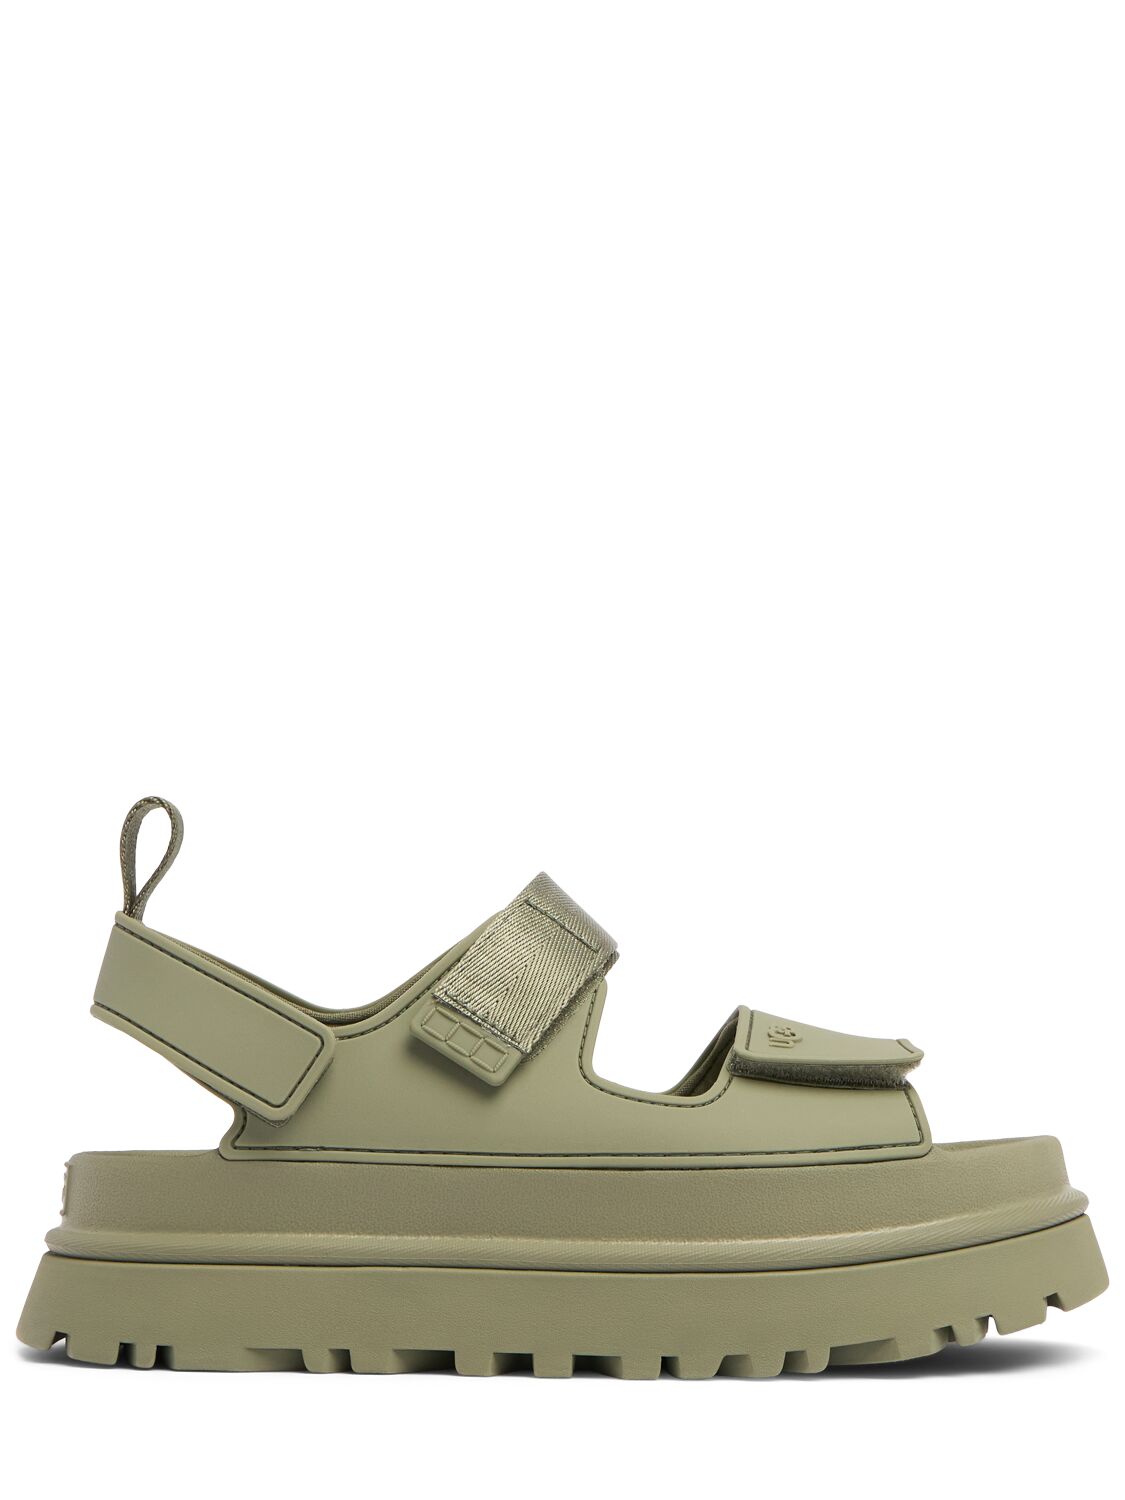 Ugg 20mm Golden Glow Tpu Sandals In Olive Green